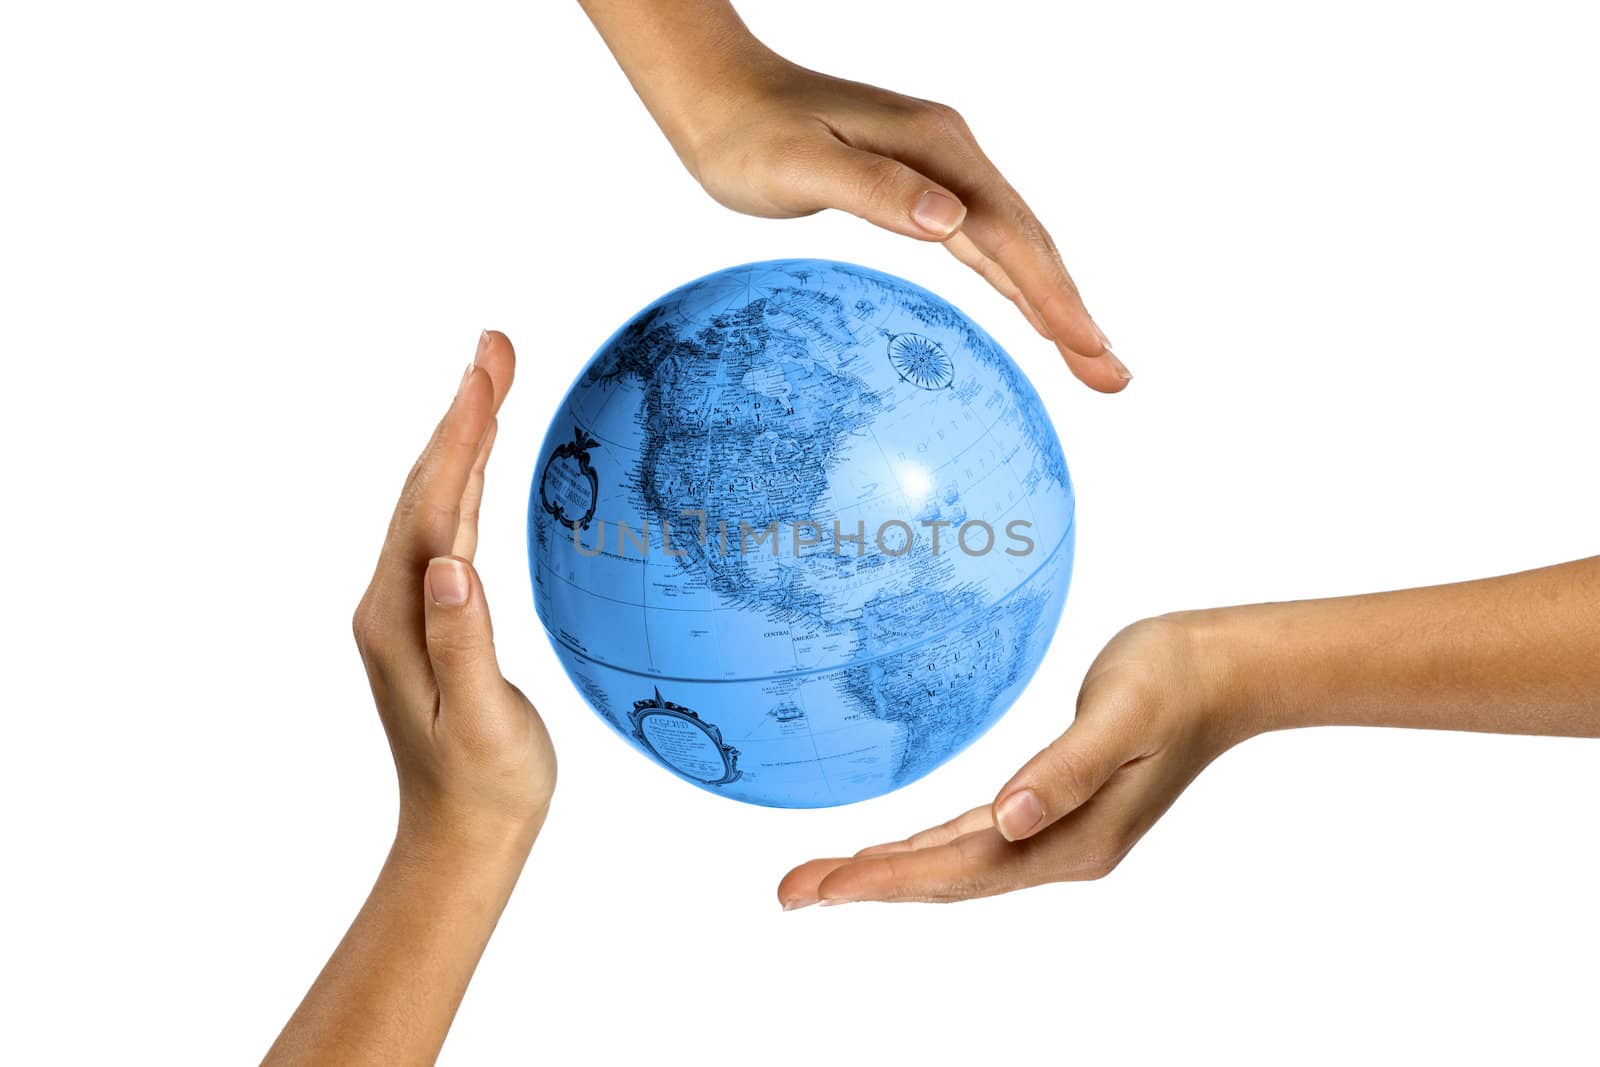 Digital image of human hands covering earth.